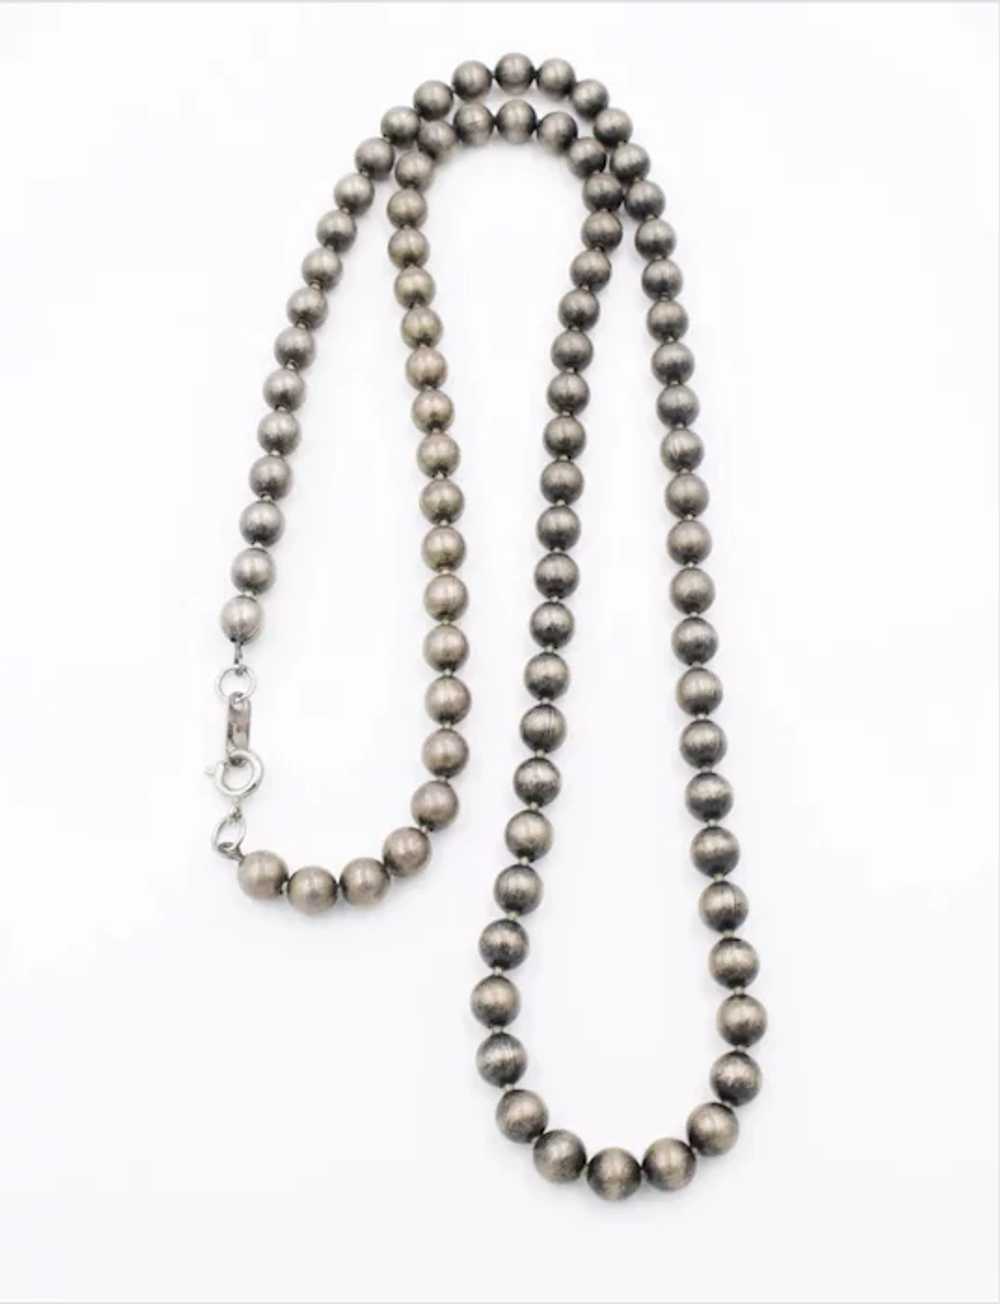 Necklace Signed Pewter Metal Bead Chain Strand - image 2